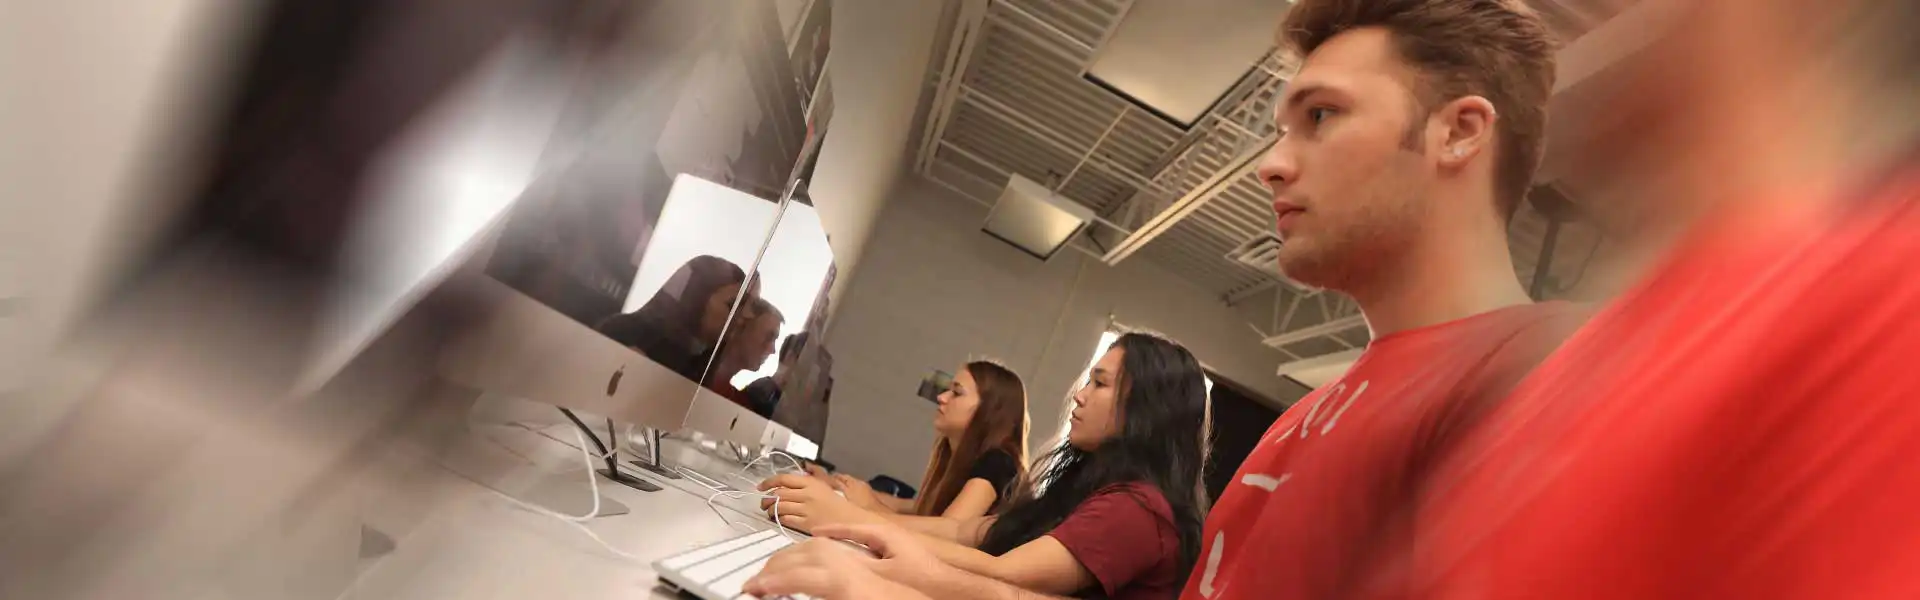 Students sitting at table working on computers